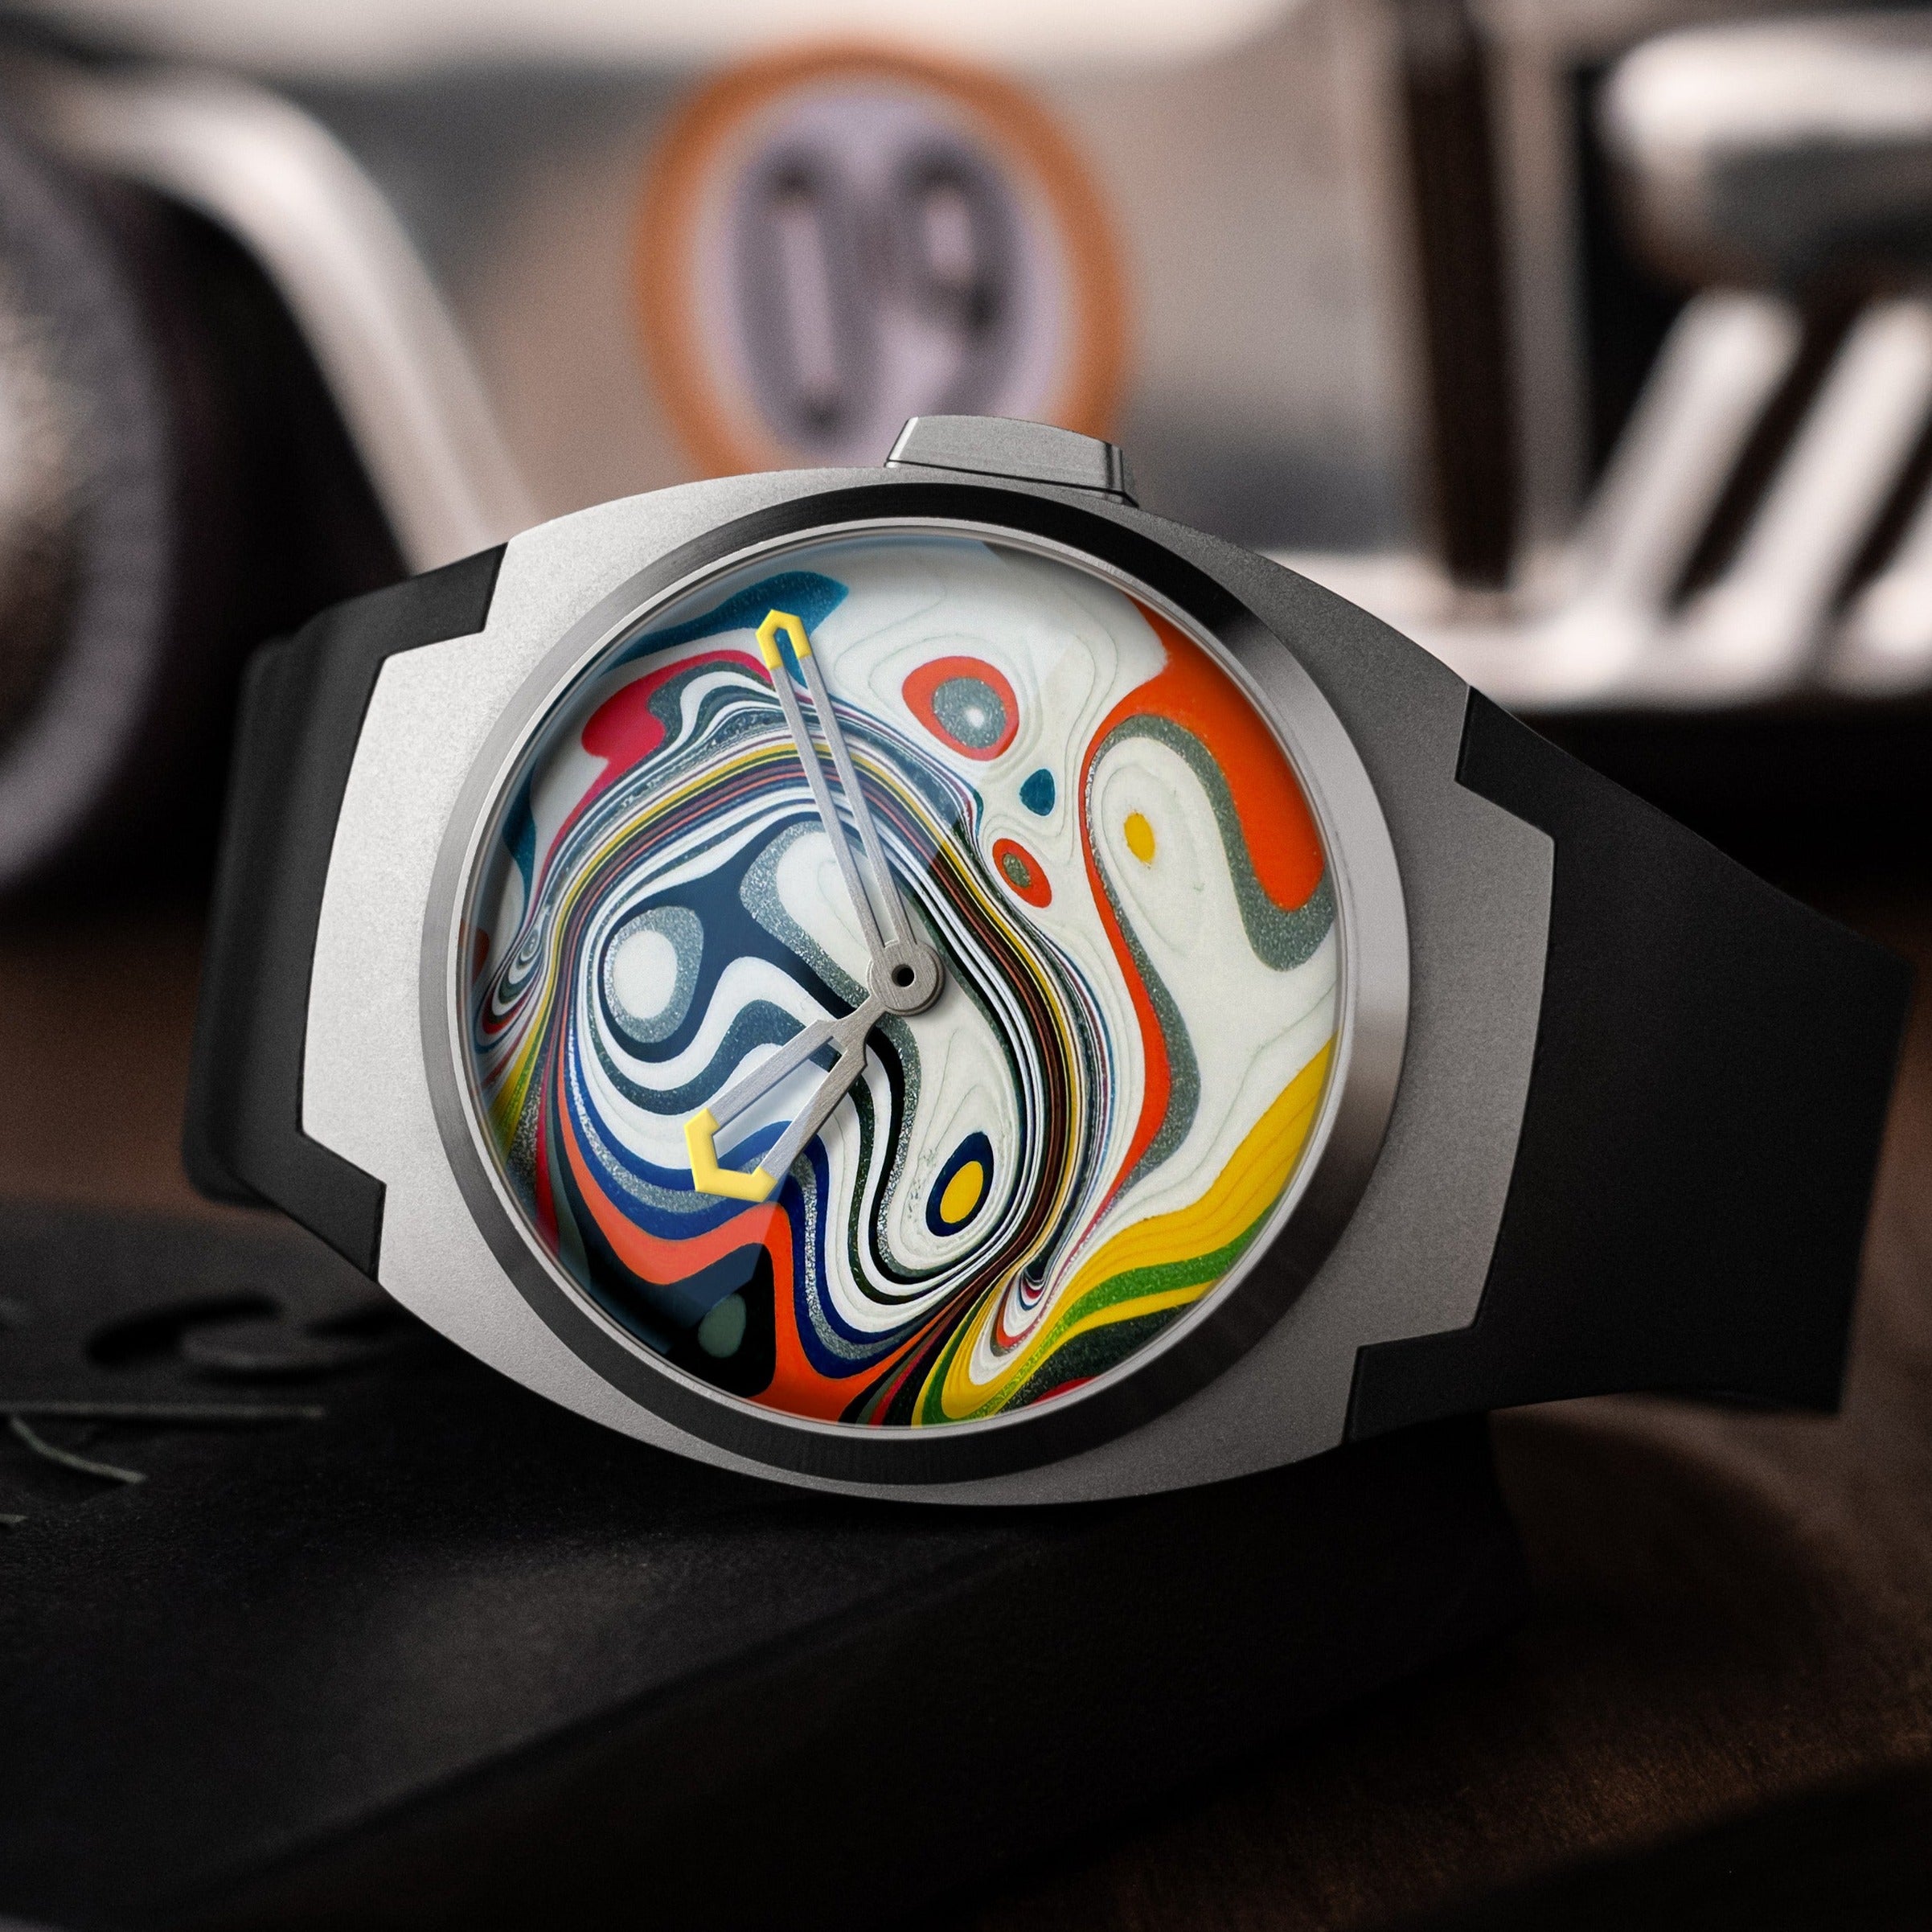 ARC II — Fordite Groovy "Roswell Omlette"